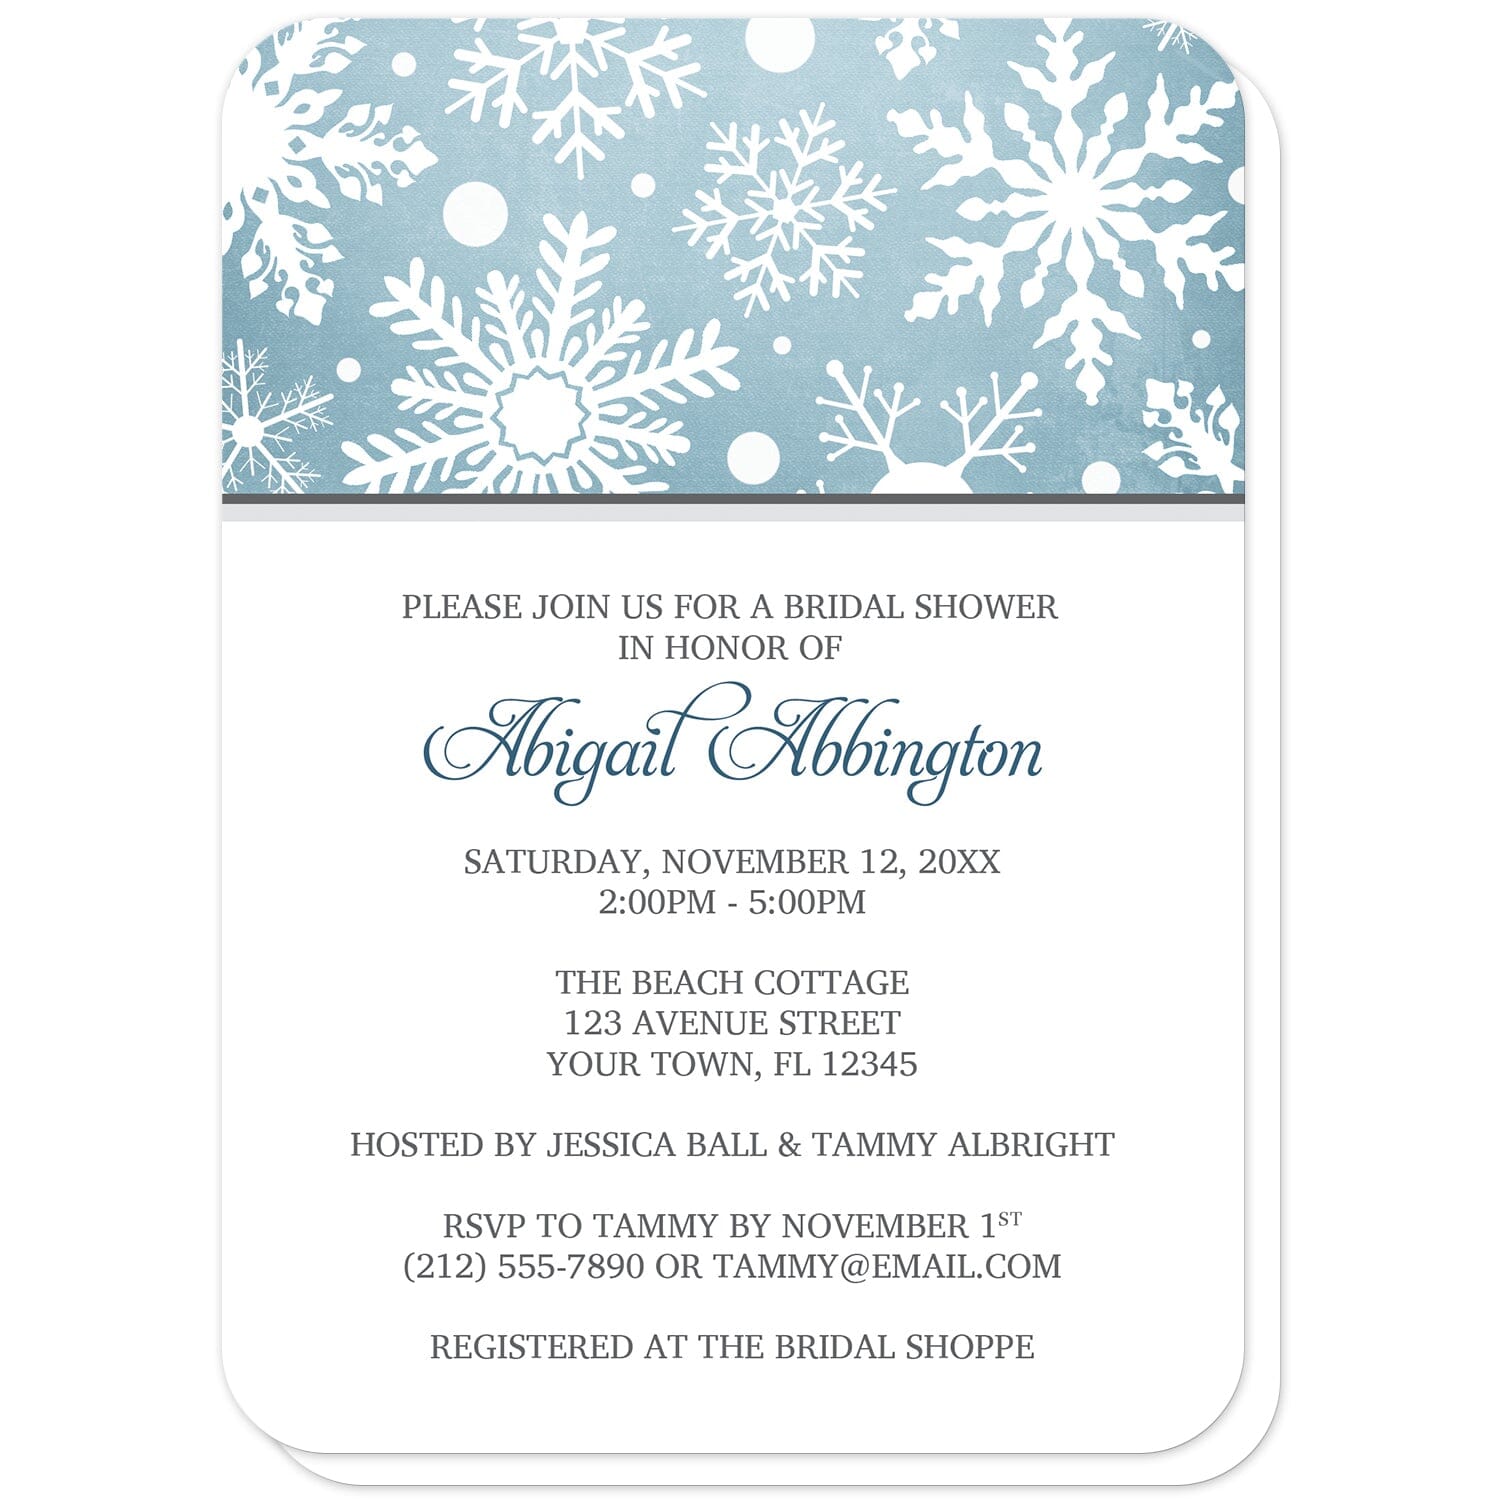 Winter Snowflake Blue Gray Bridal Shower Invitations (with rounded corners) at Artistically Invited. Modern winter snowflake blue gray bridal shower invitations designed with a white snowflakes pattern over an organic blue wintry background at the top of the invitations. Your personalized bridal shower celebration details are custom printed in blue and gray on white below the snowflakes. 